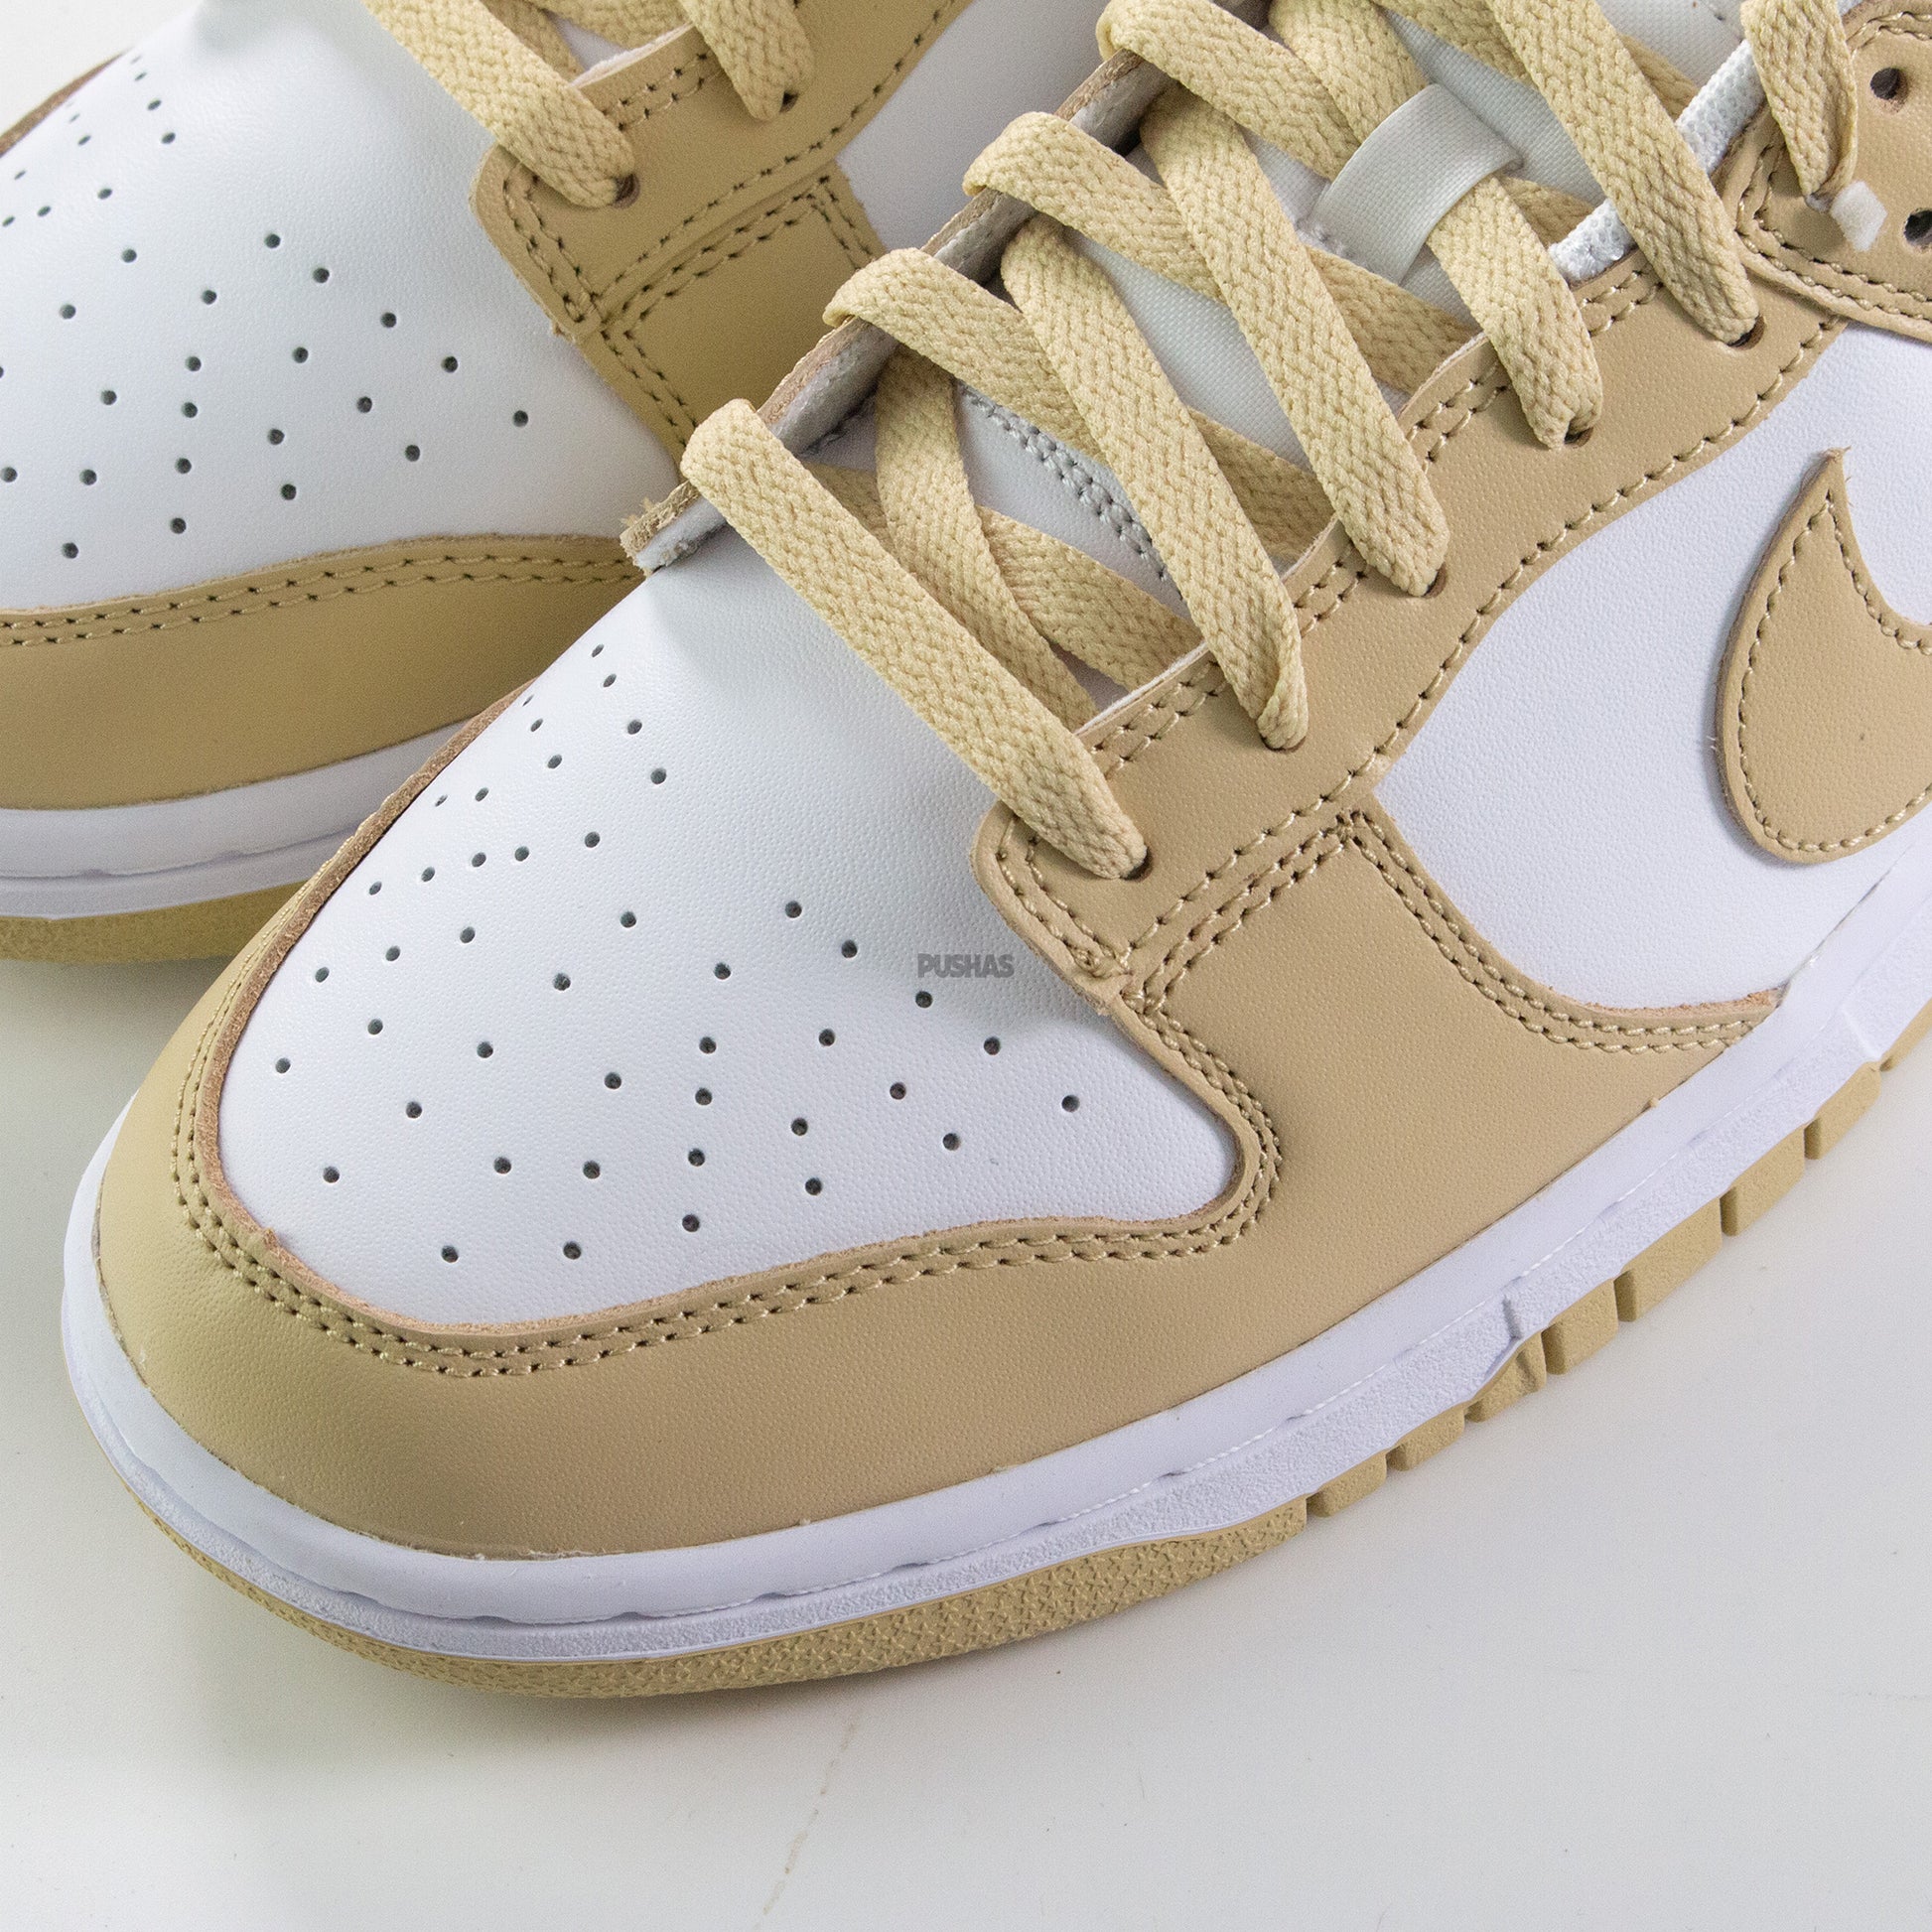 Nike-Dunk-Low-Team-Gold-2023